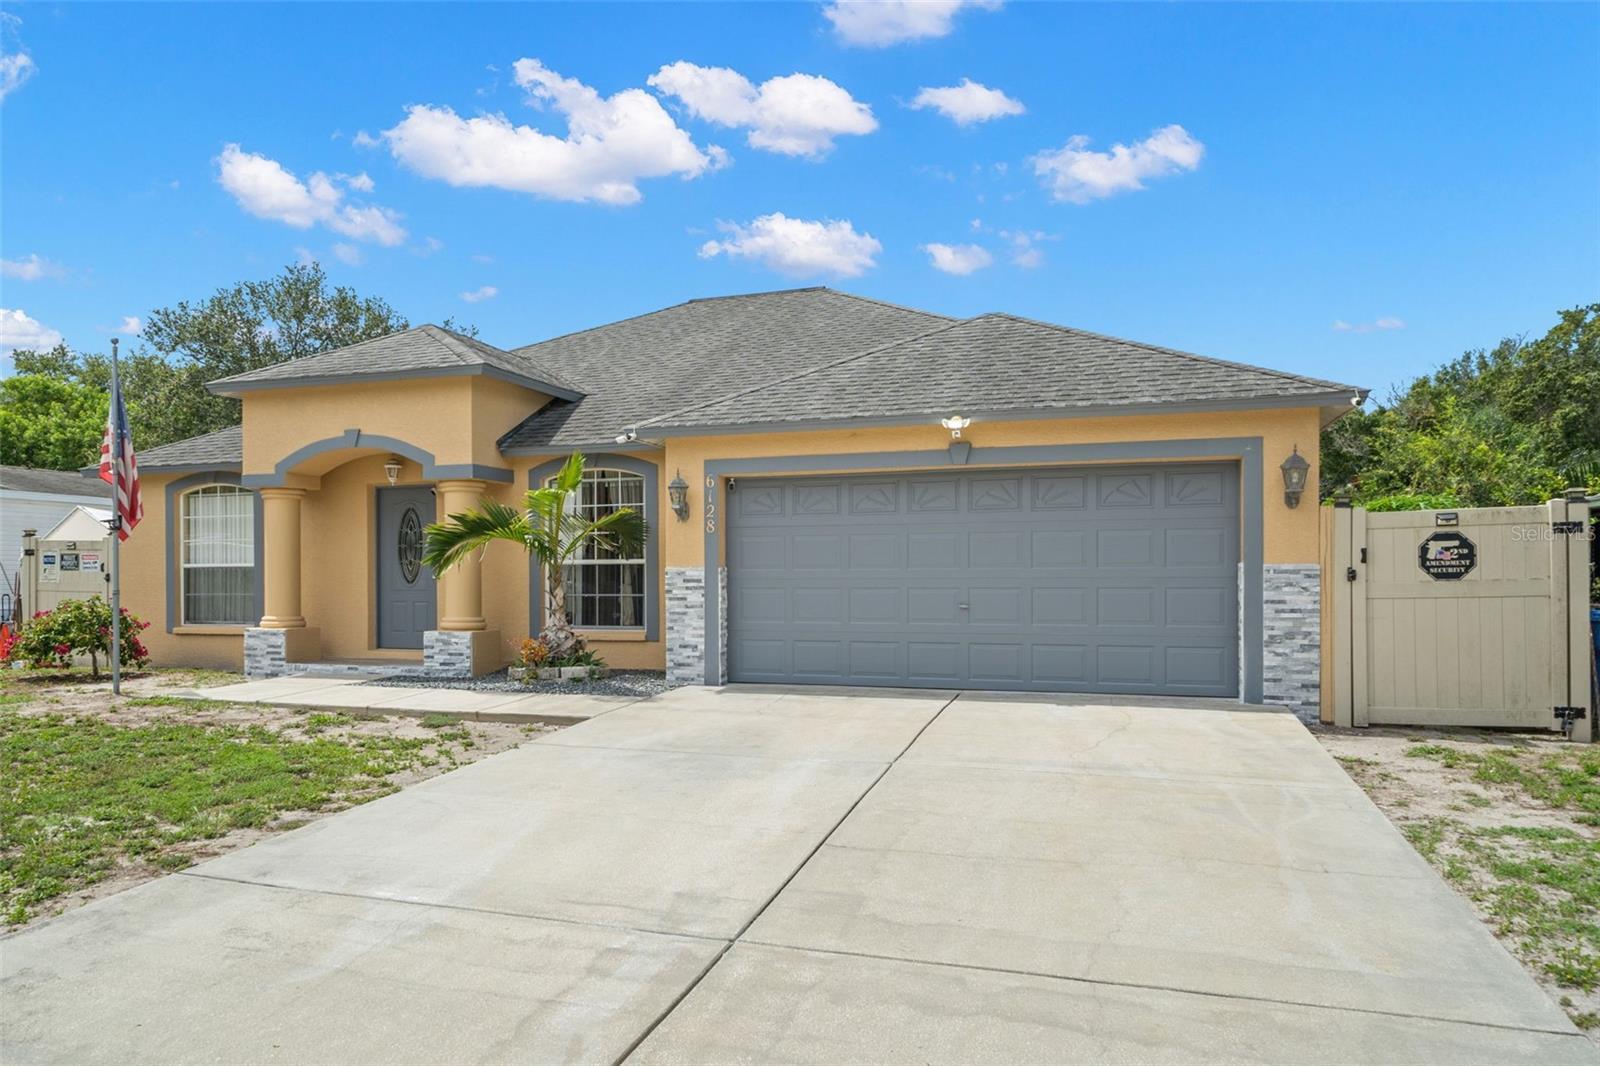 Photo one of 6128 110Th N Ave Pinellas Park FL 33782 | MLS T3483278